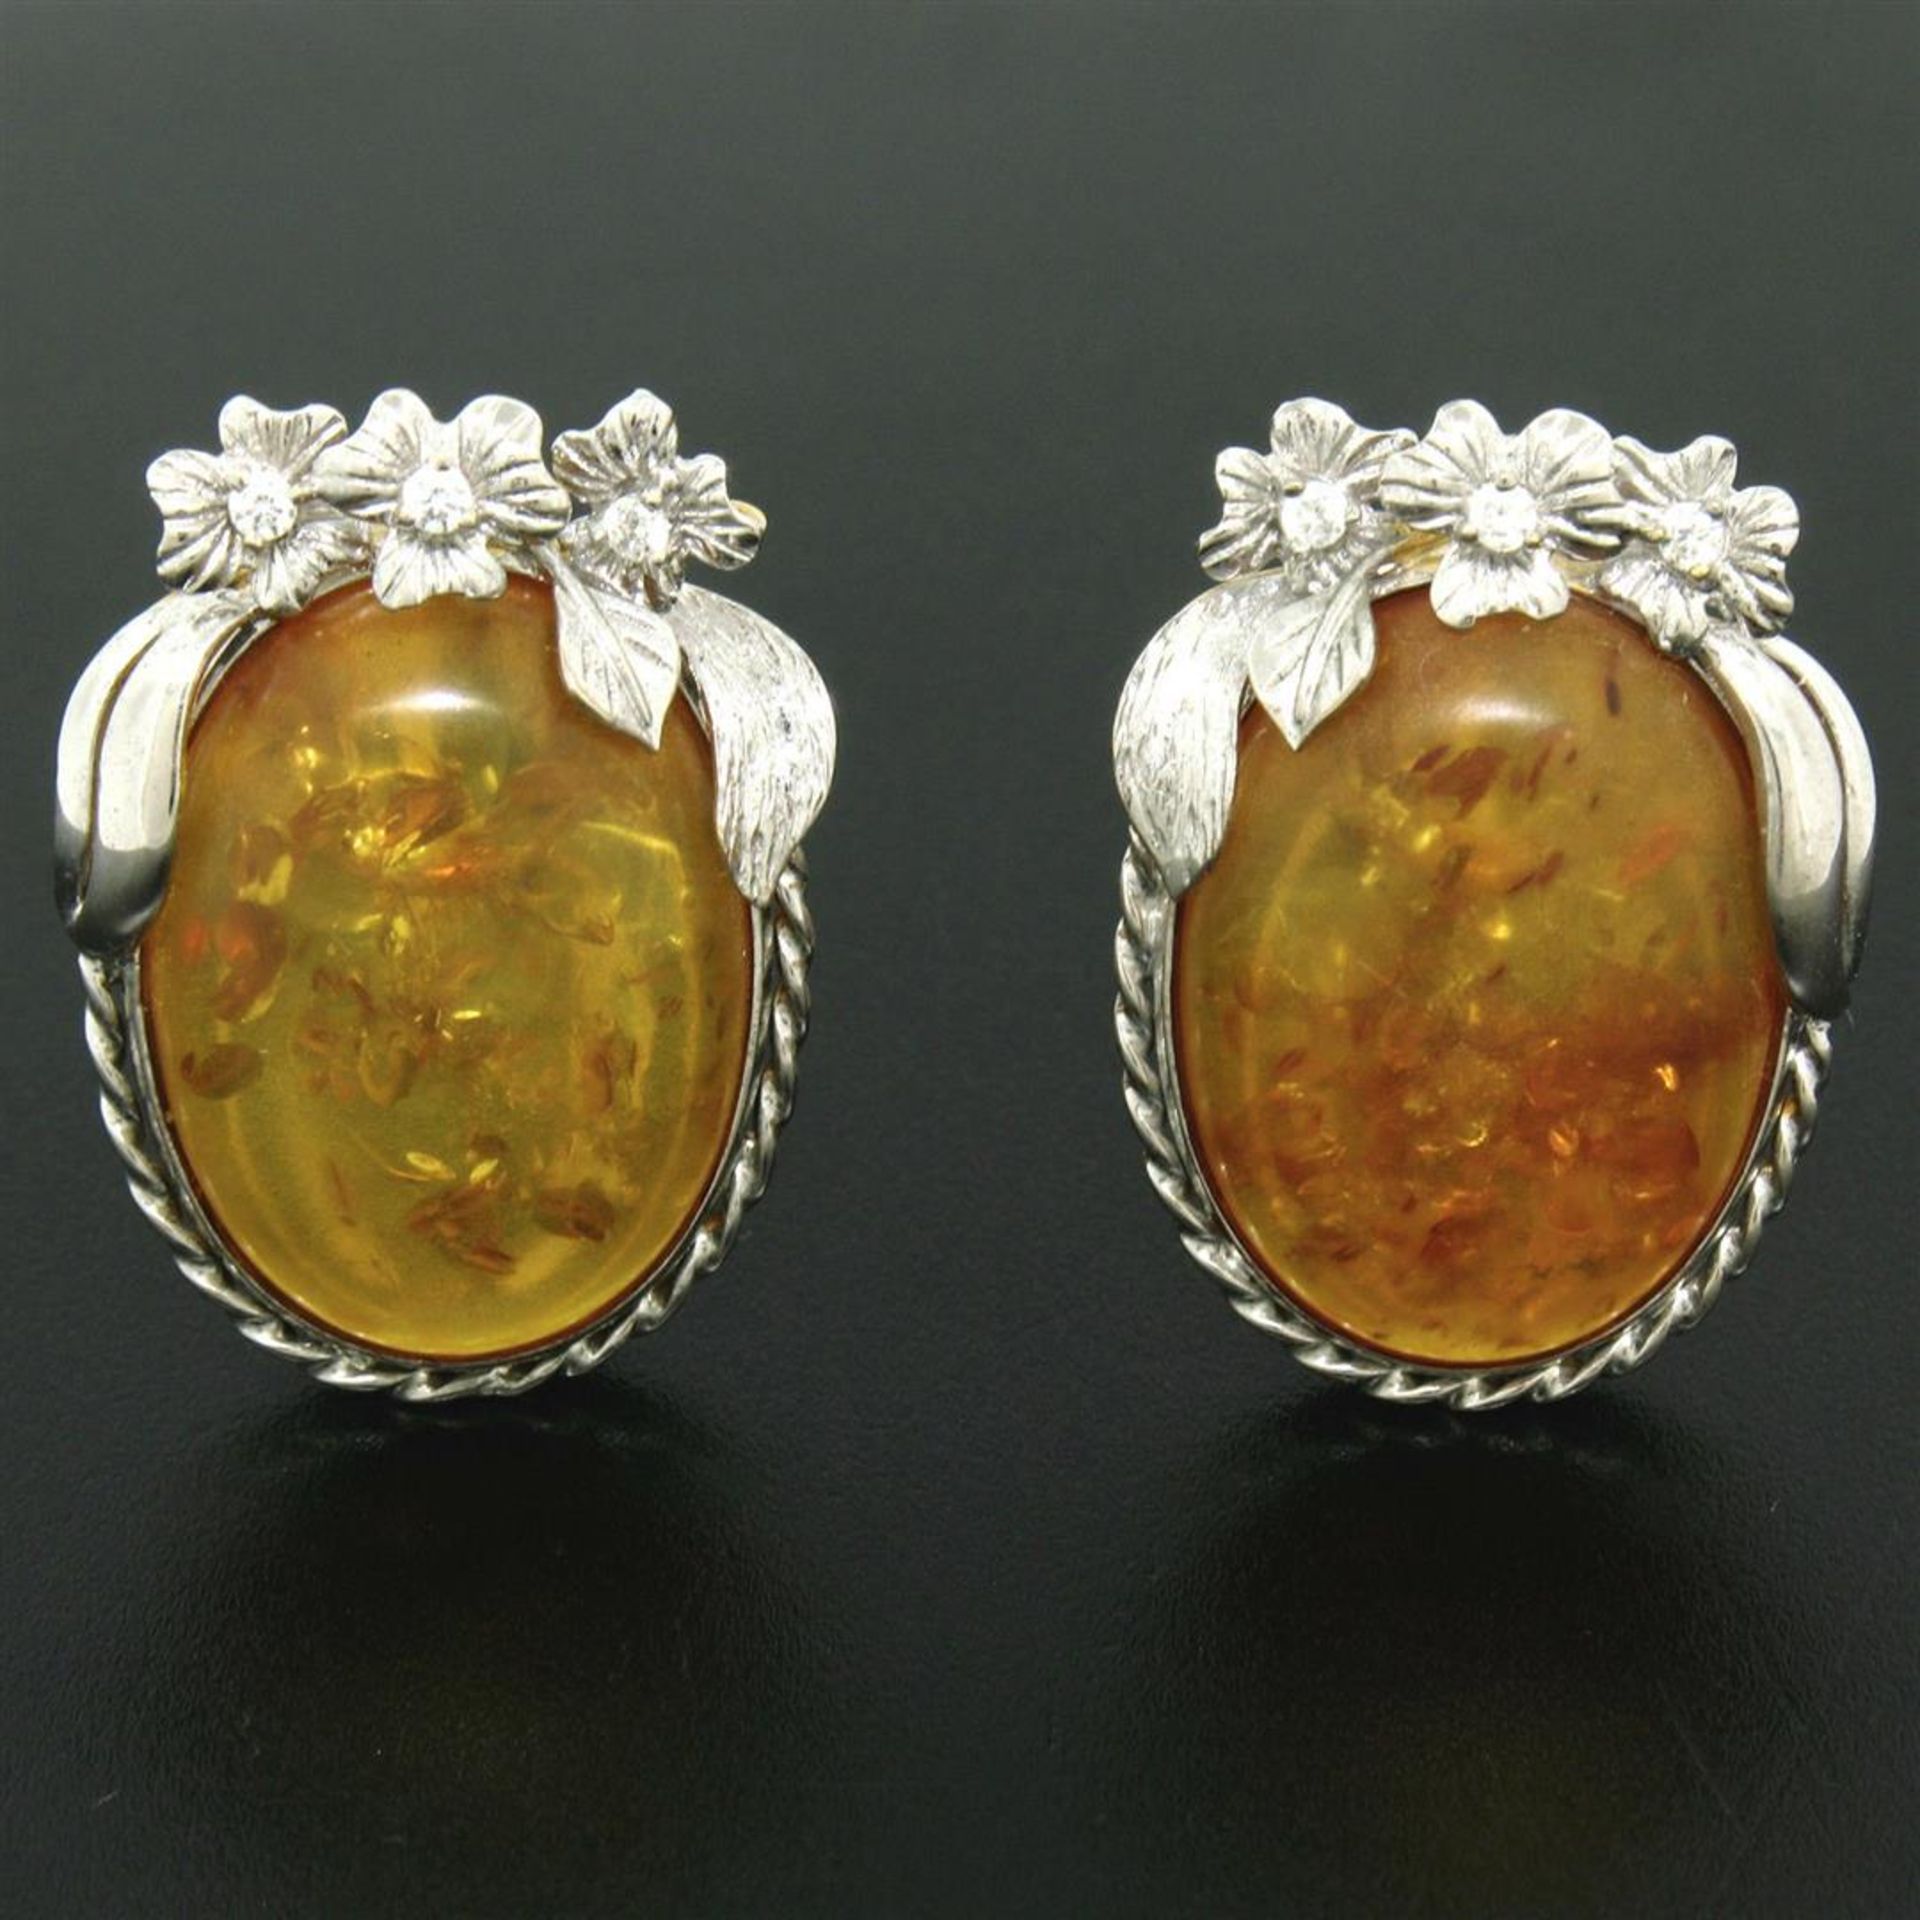 Vintage 18k White Gold Large Oval Amber Diamond Omega Earrings w/ Flower Etching - Image 2 of 6